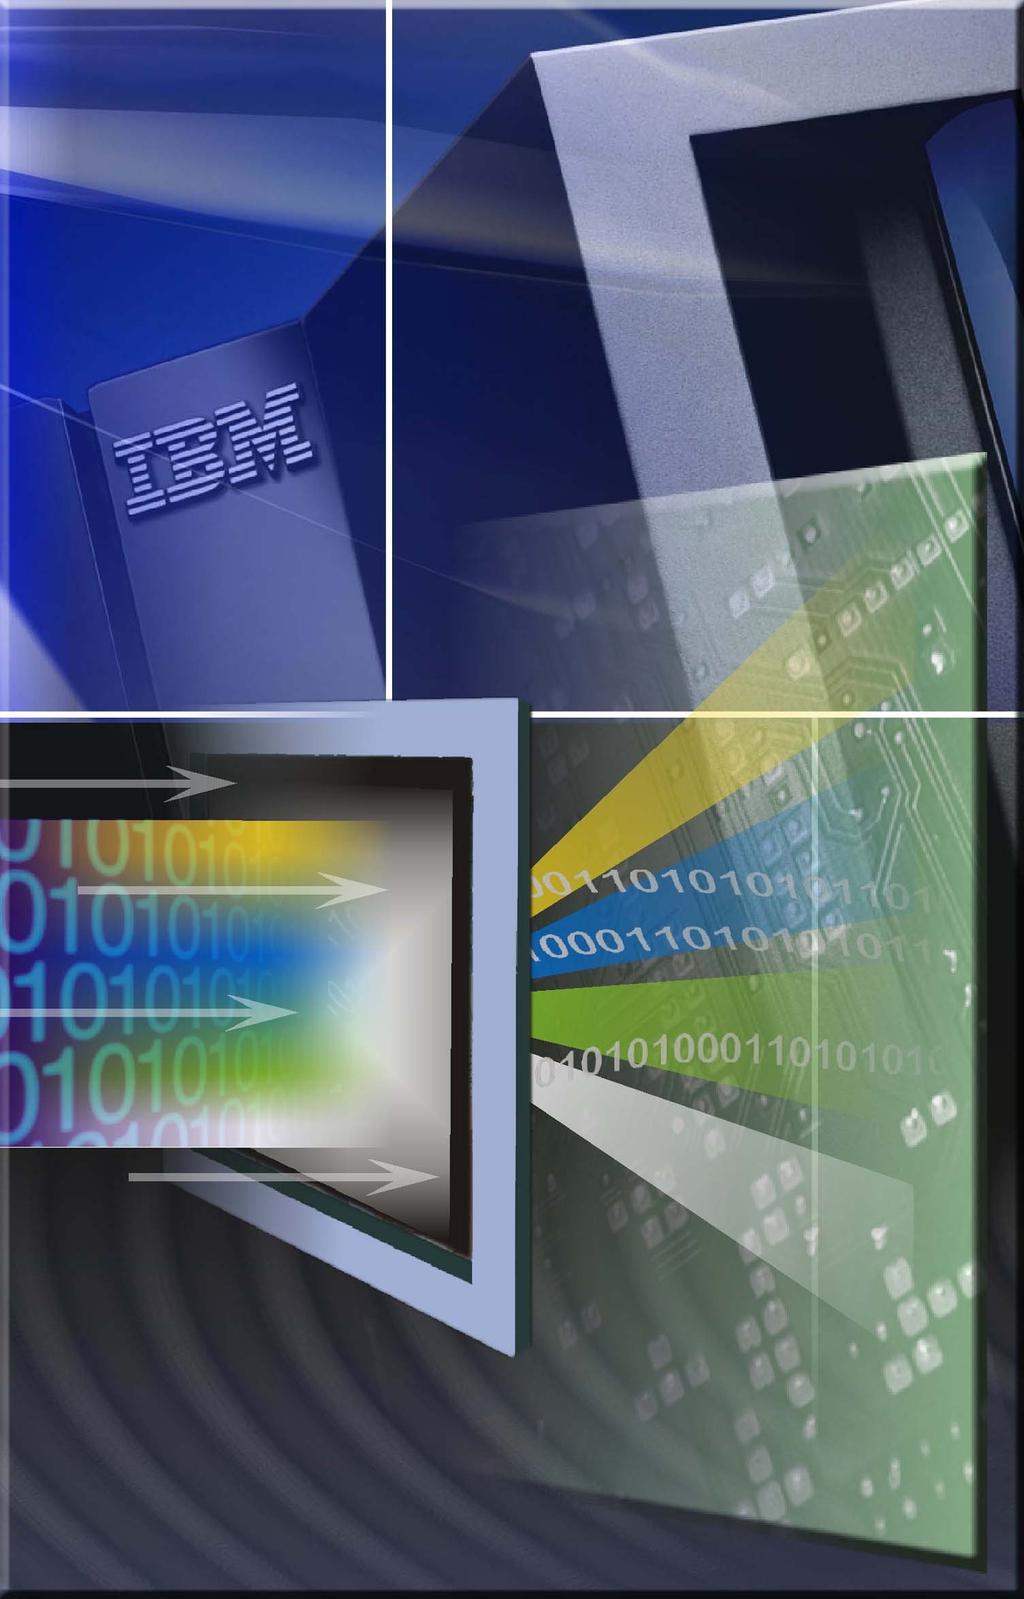 Accelerators Delivering new functionality IBM